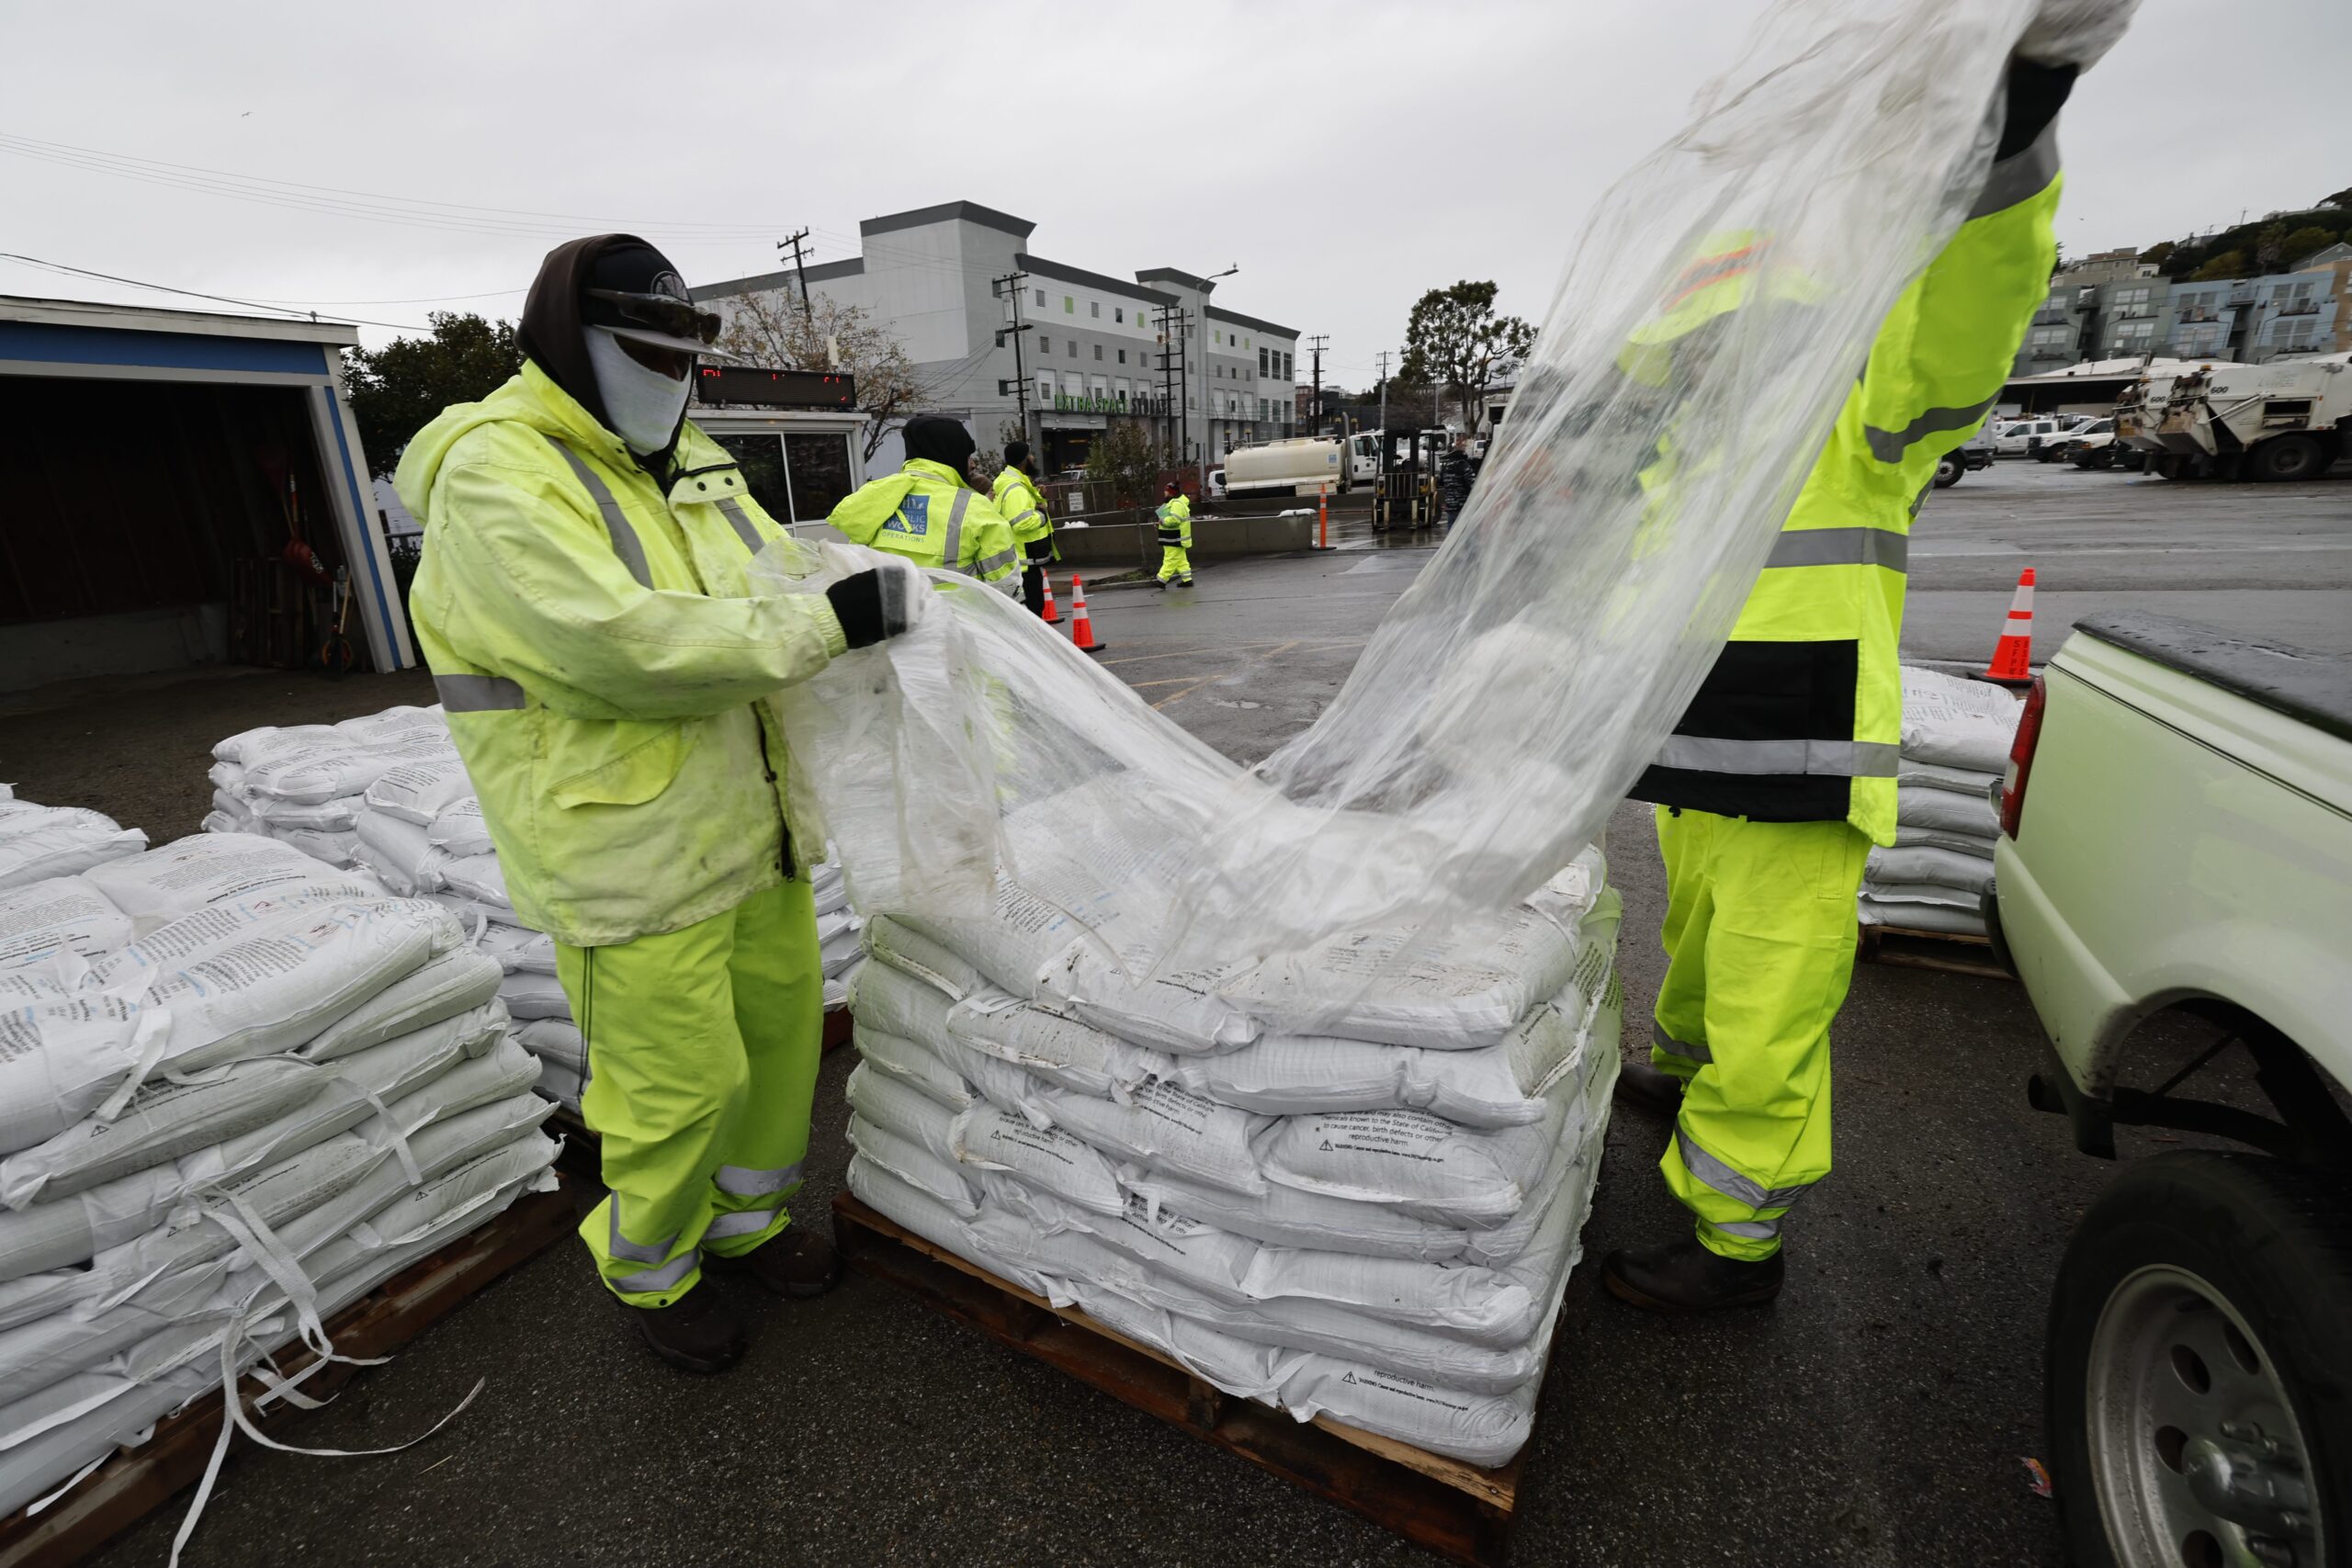 Members of the Department of Public Works unpack sandbags to distribute to the public at 2323 Cesar Chavez in San Francisco on January 4, 2023.